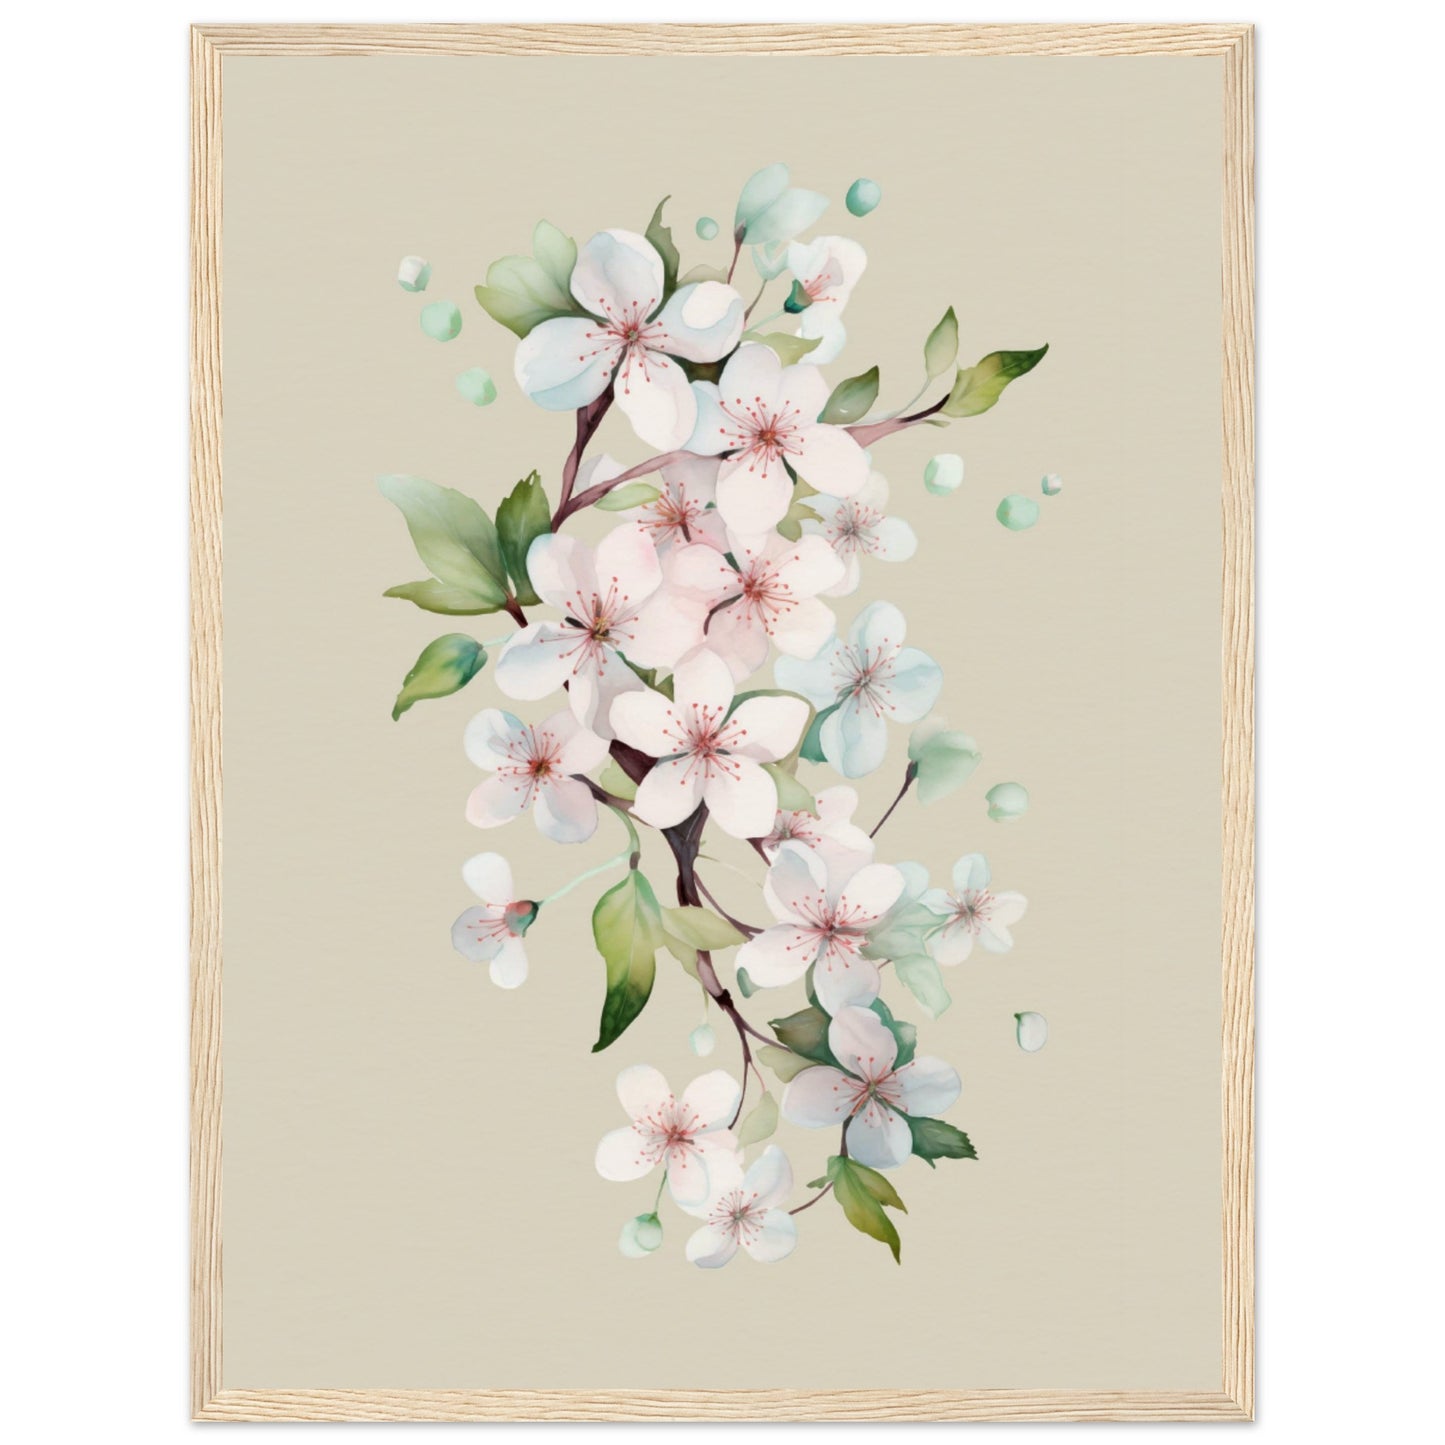 CHERRY BLOSSOMS No. 1 IN PINK BACKGROUND - in Museum-Quality Matte Paper Wooden Framed Poster